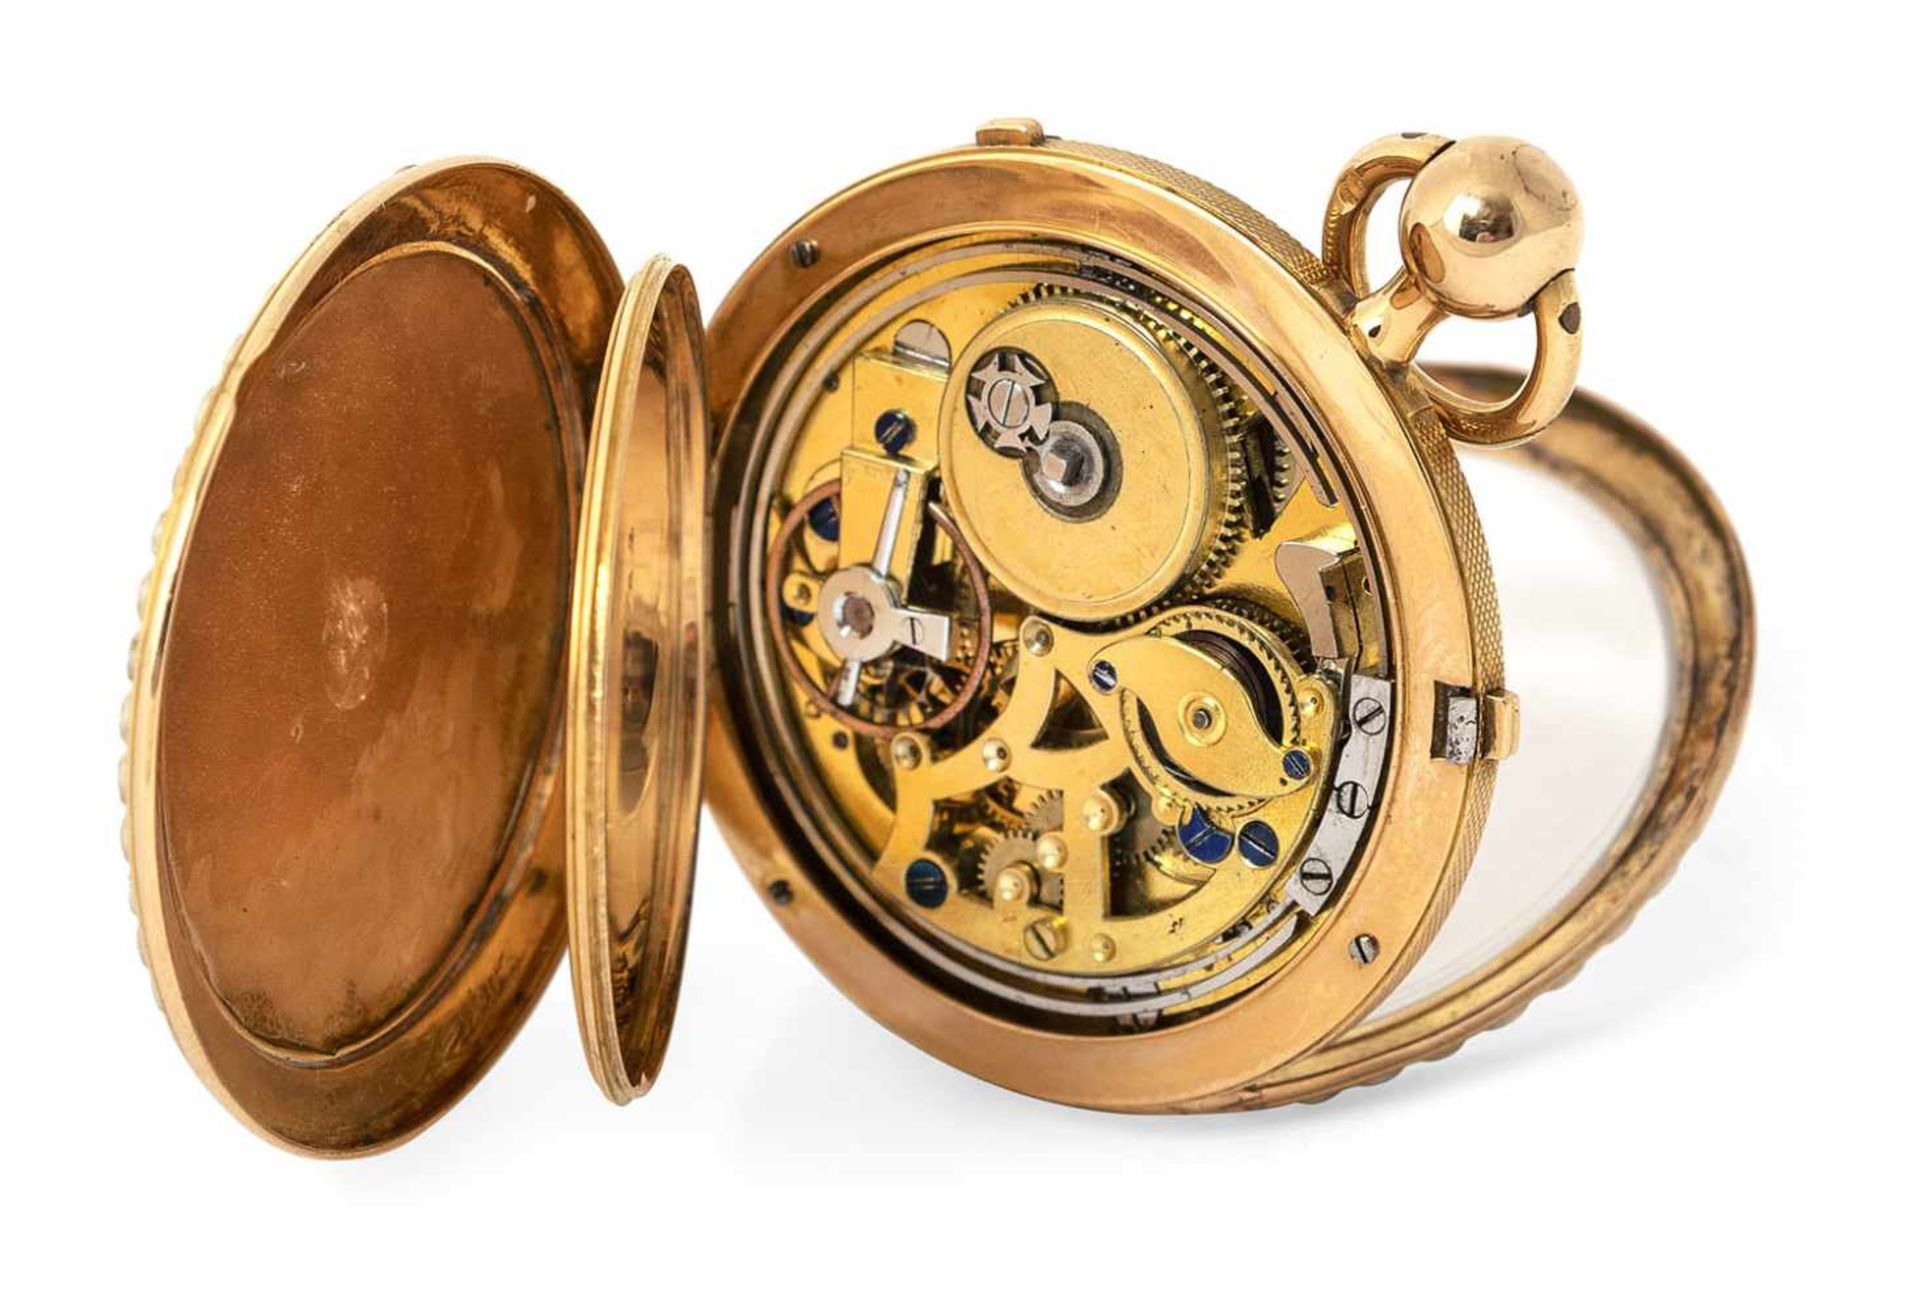 A fine 18ct gold ladies pocket watch, France, c. 1820. Enamel and pearl decorated case.